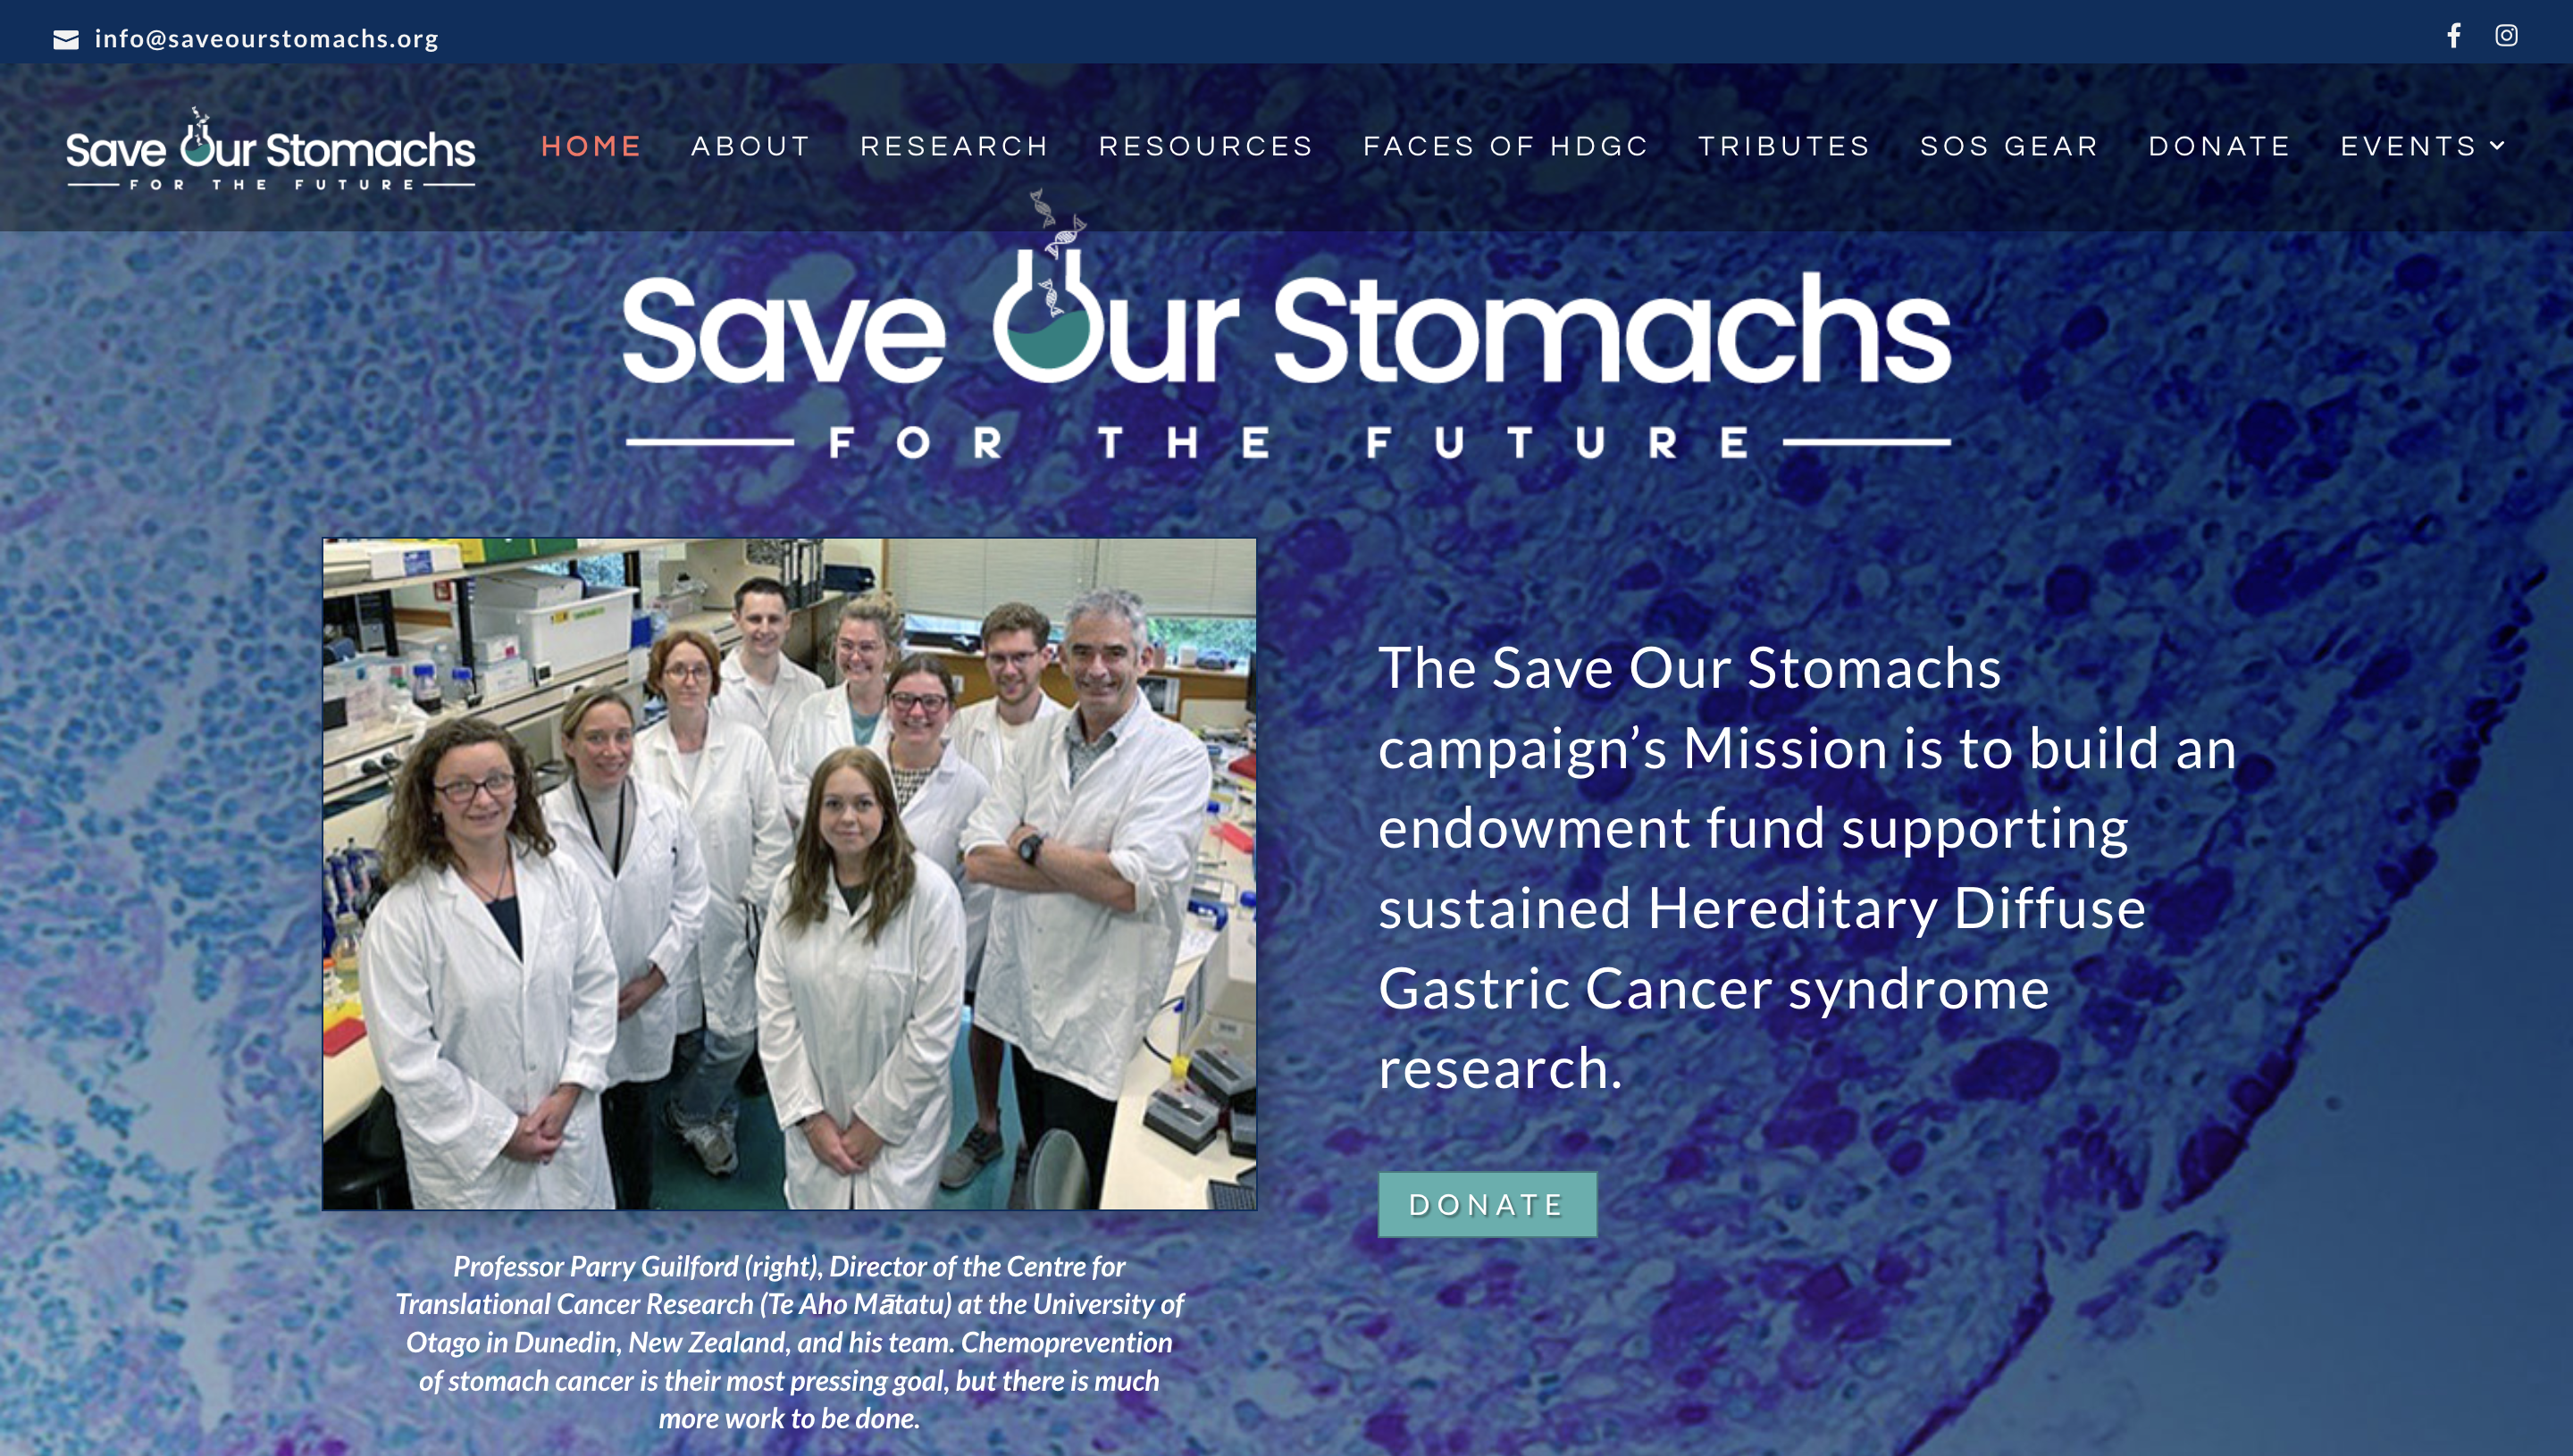 save-our-stomachs-endowment